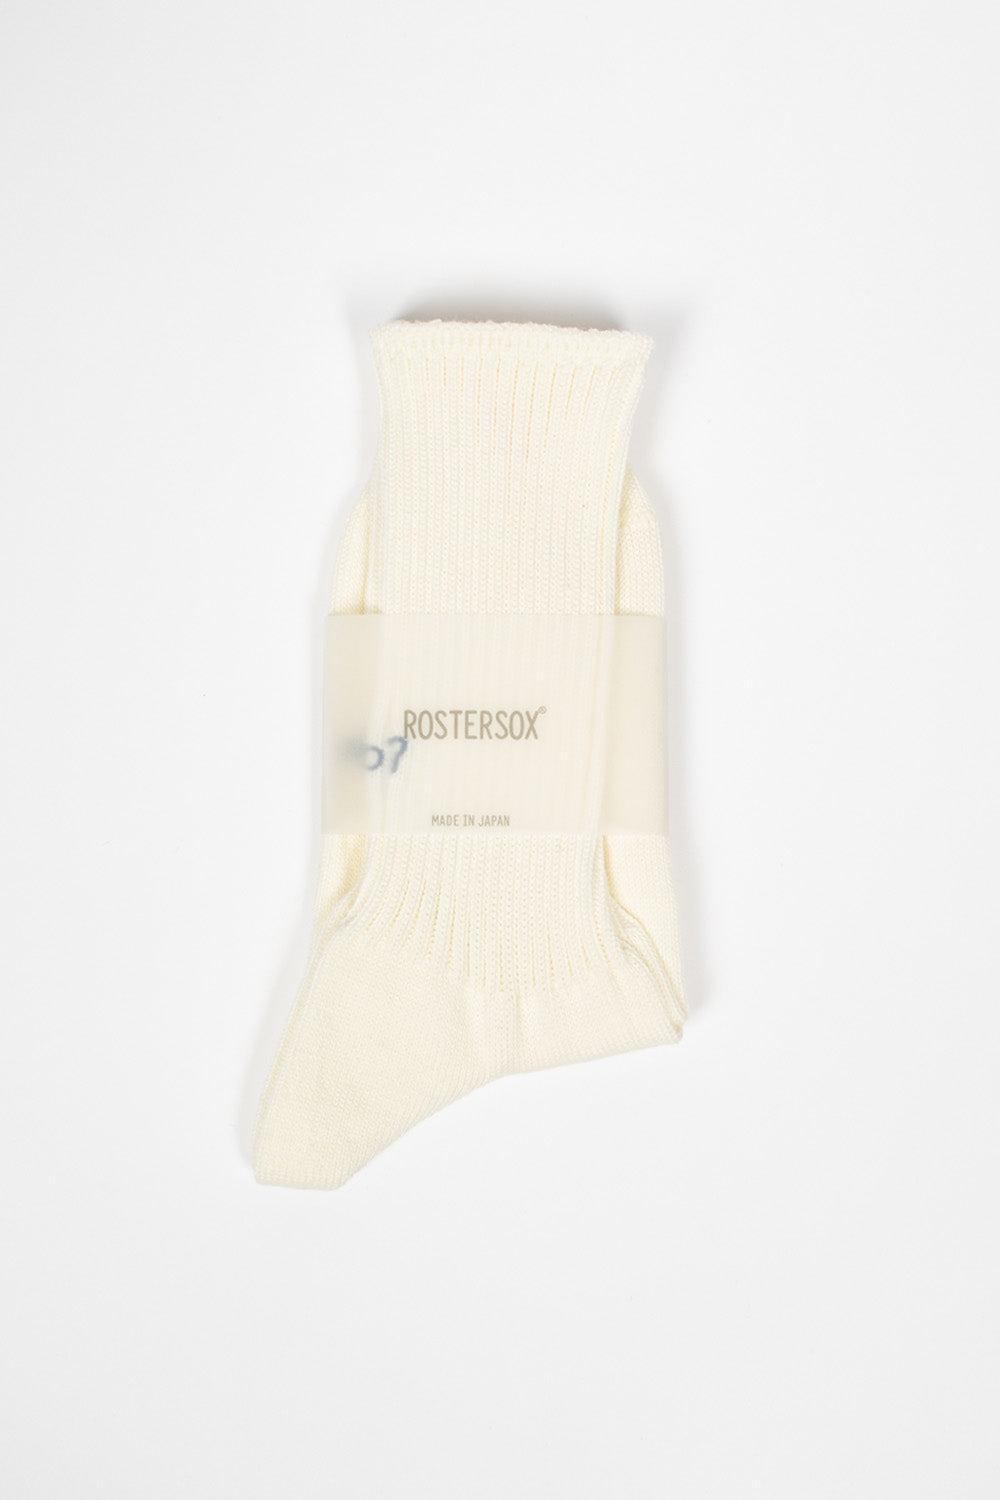 RS-275 What's Up Socks White